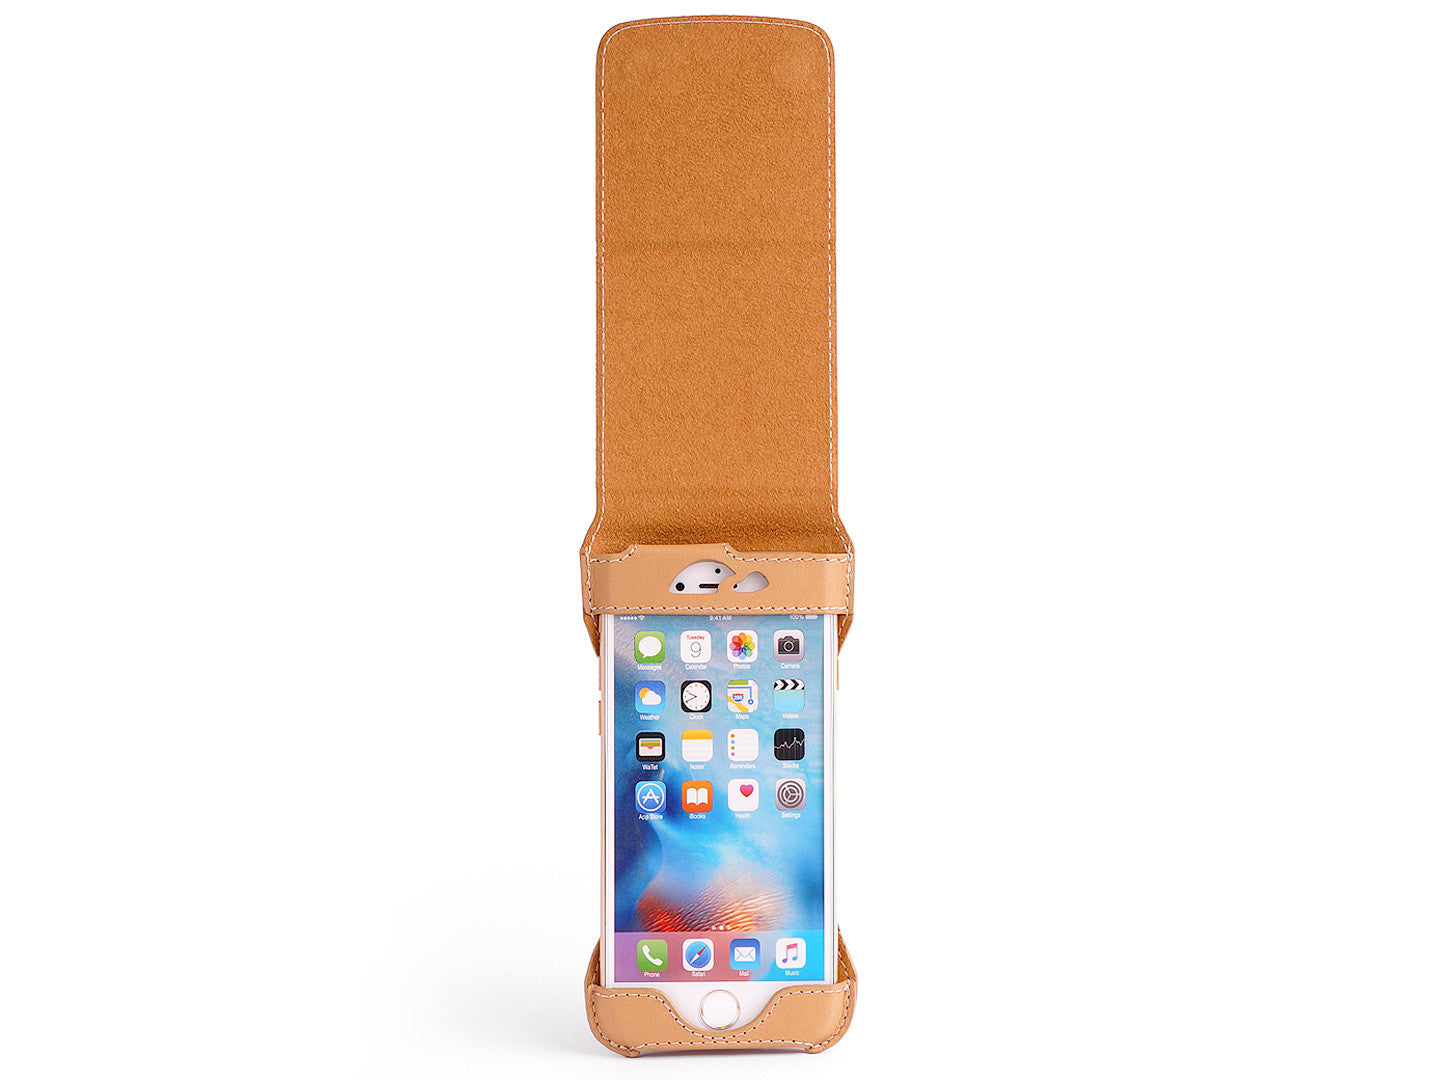 Leather Flip Case iPhone 6 / 6 Plus - Stand Function - Card Slot - open - Carapaz